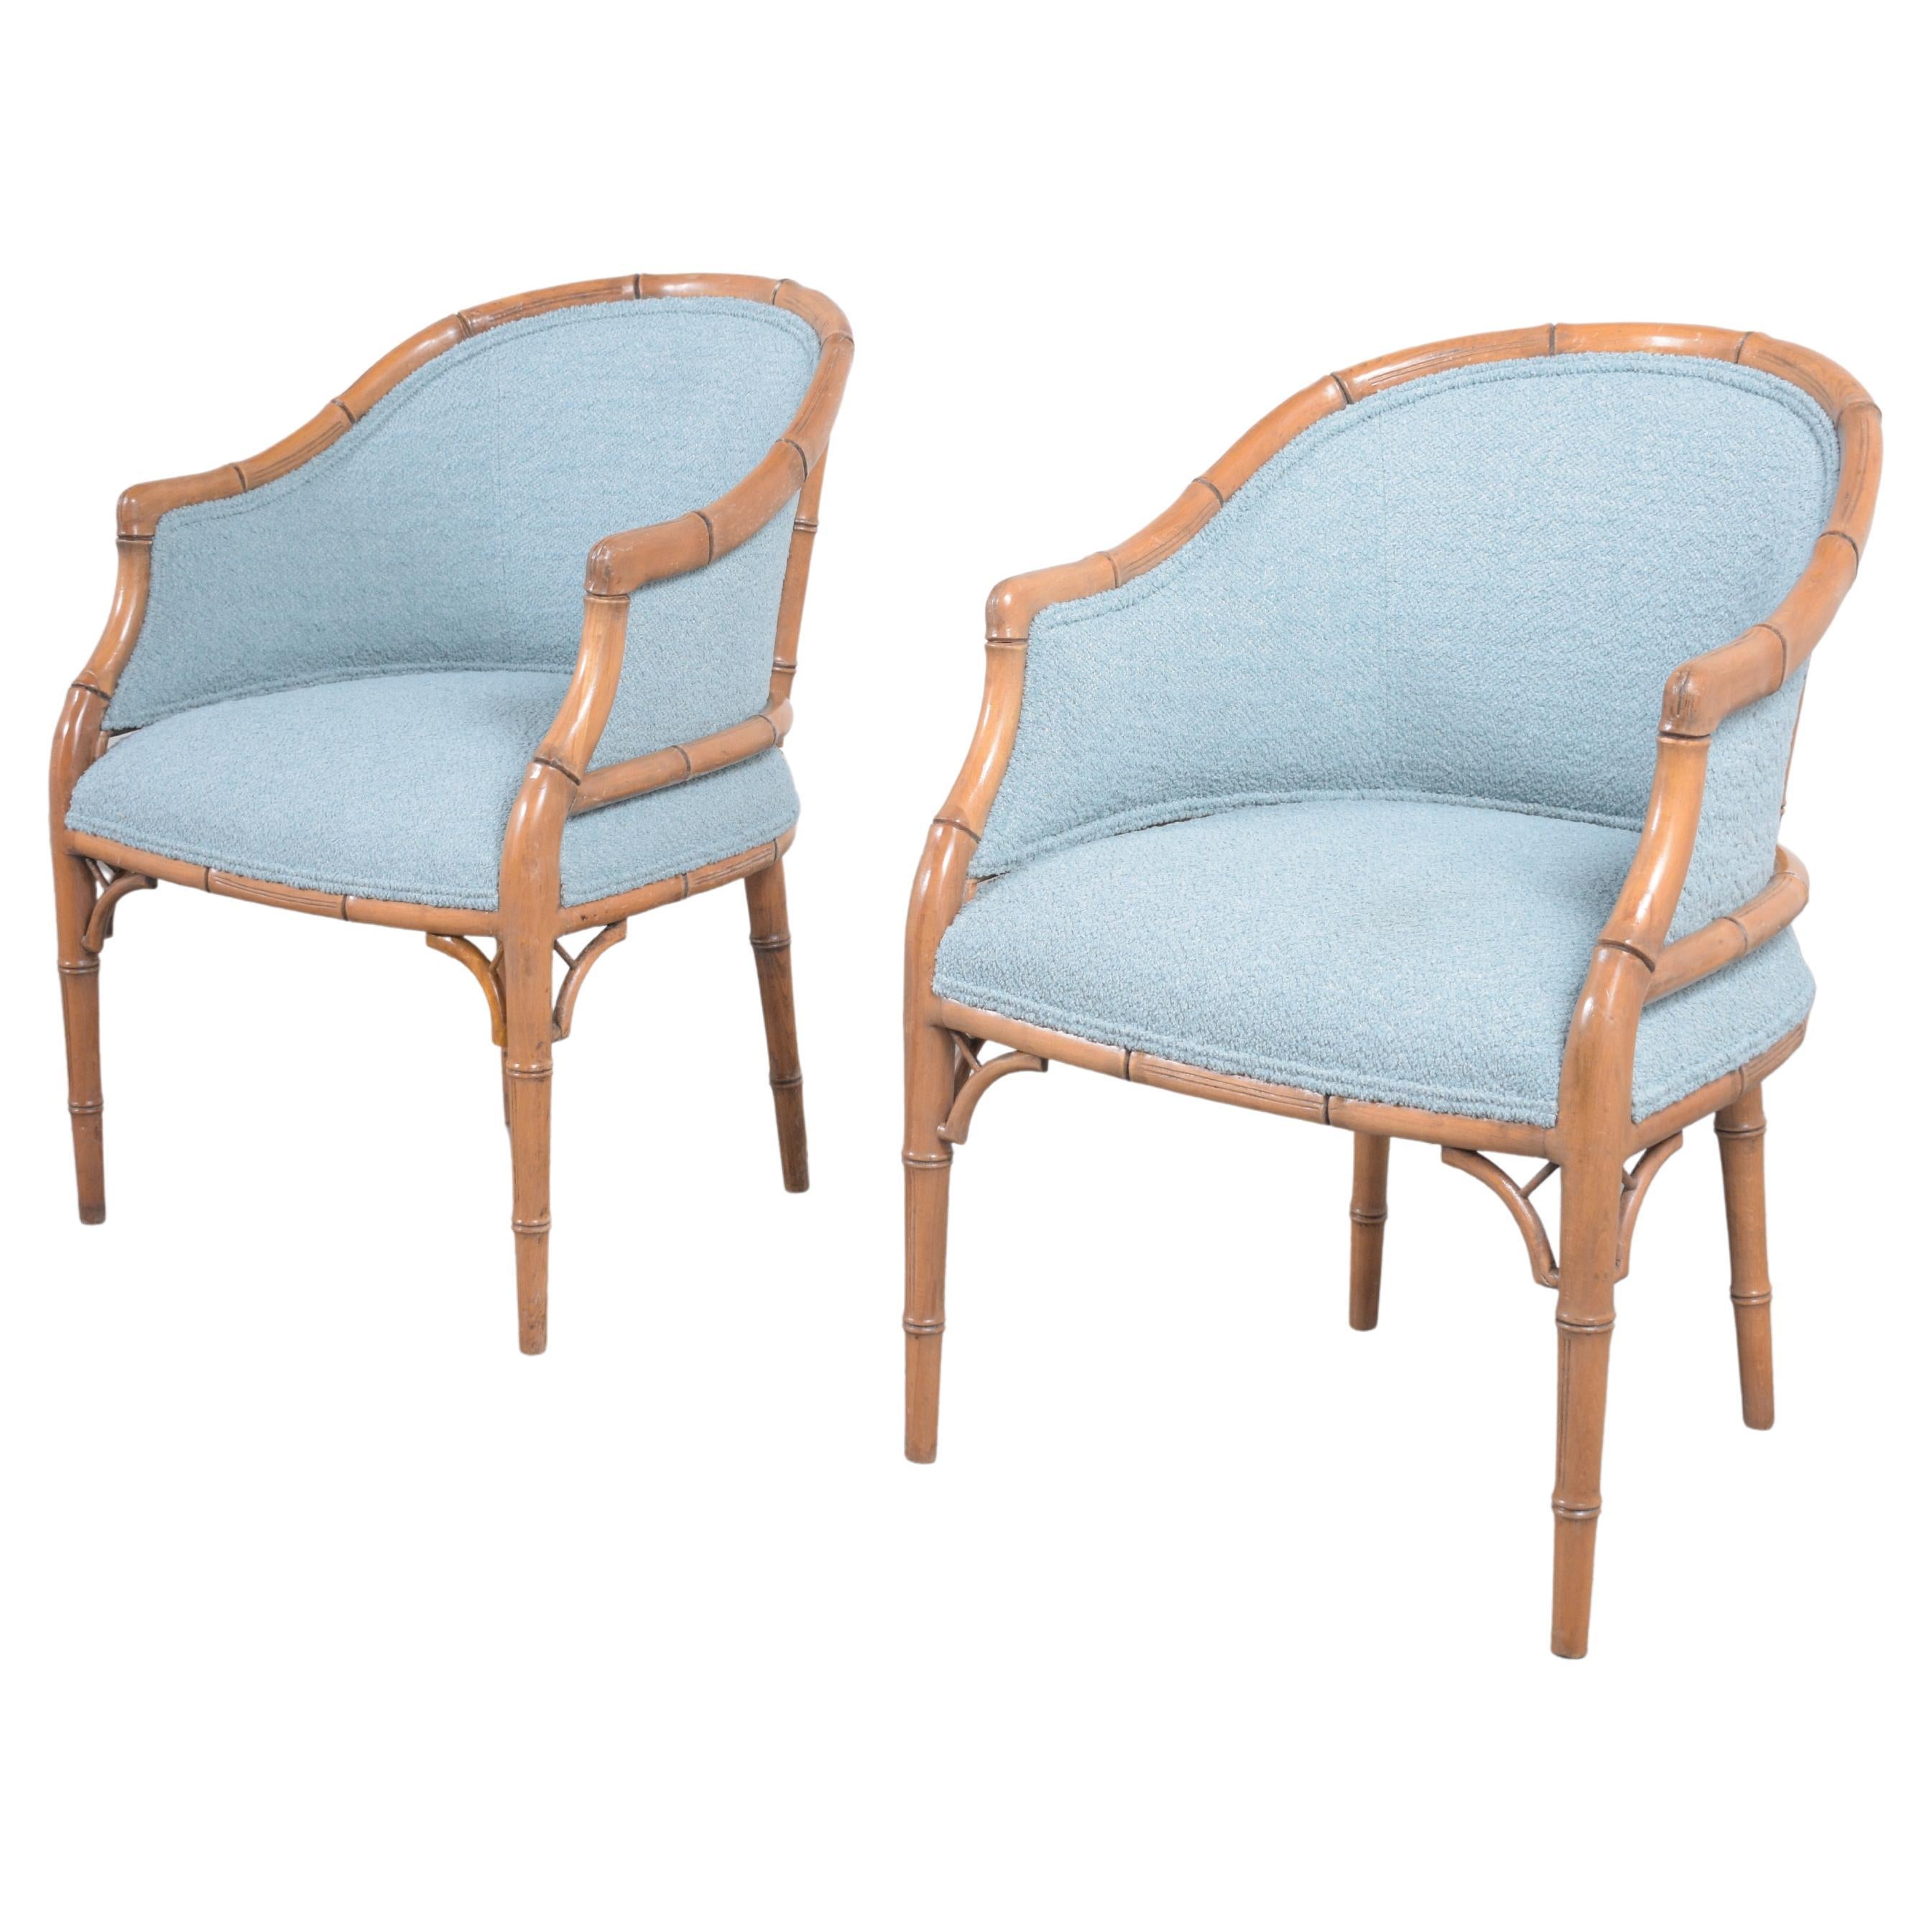 An extraordinary pair of vintage Hollywood Regency armchairs handcrafted out of wood in great condition has been completely restored upholstered and refinished by our professional expert craftsman team in-house. This lovely pair of lounge chairs are